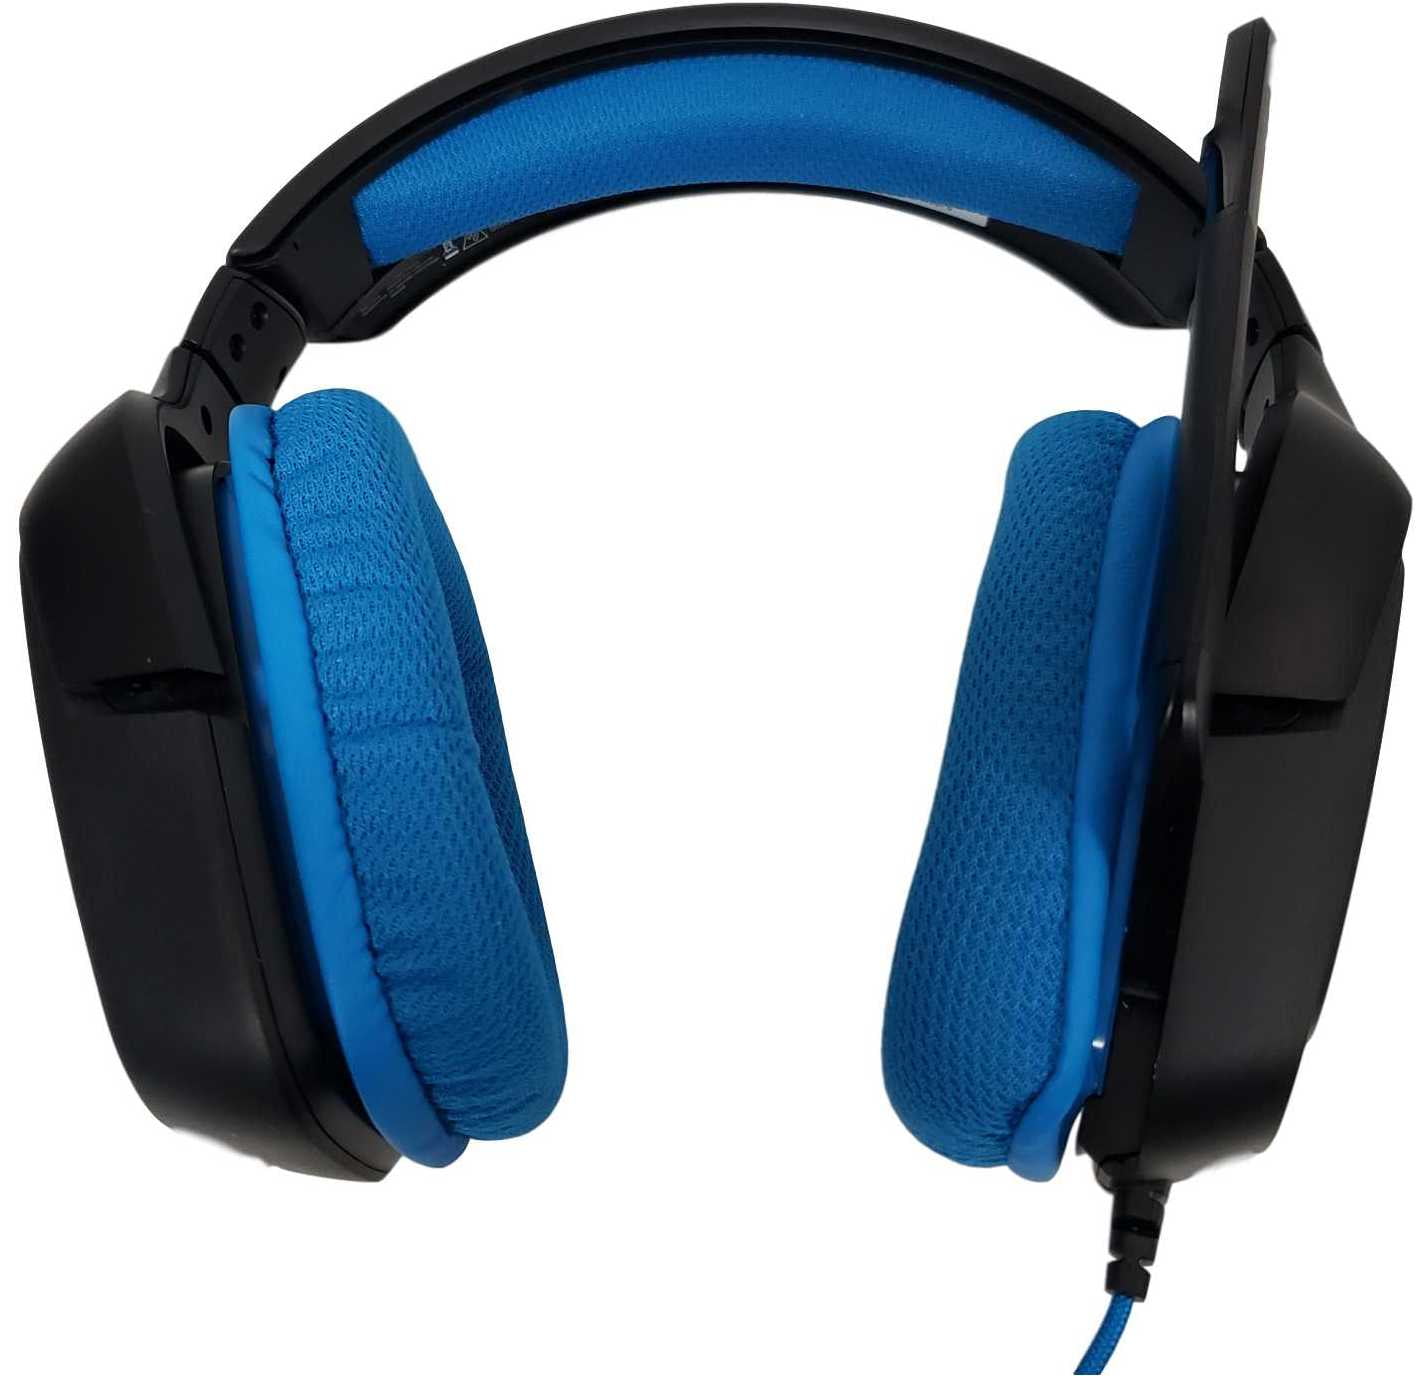 Logitech G430 Stereo Gaming Noise-cancelling Wired Gaming Headset For PS3, PS4 (Non-Retail Packaging) - Walmart.com